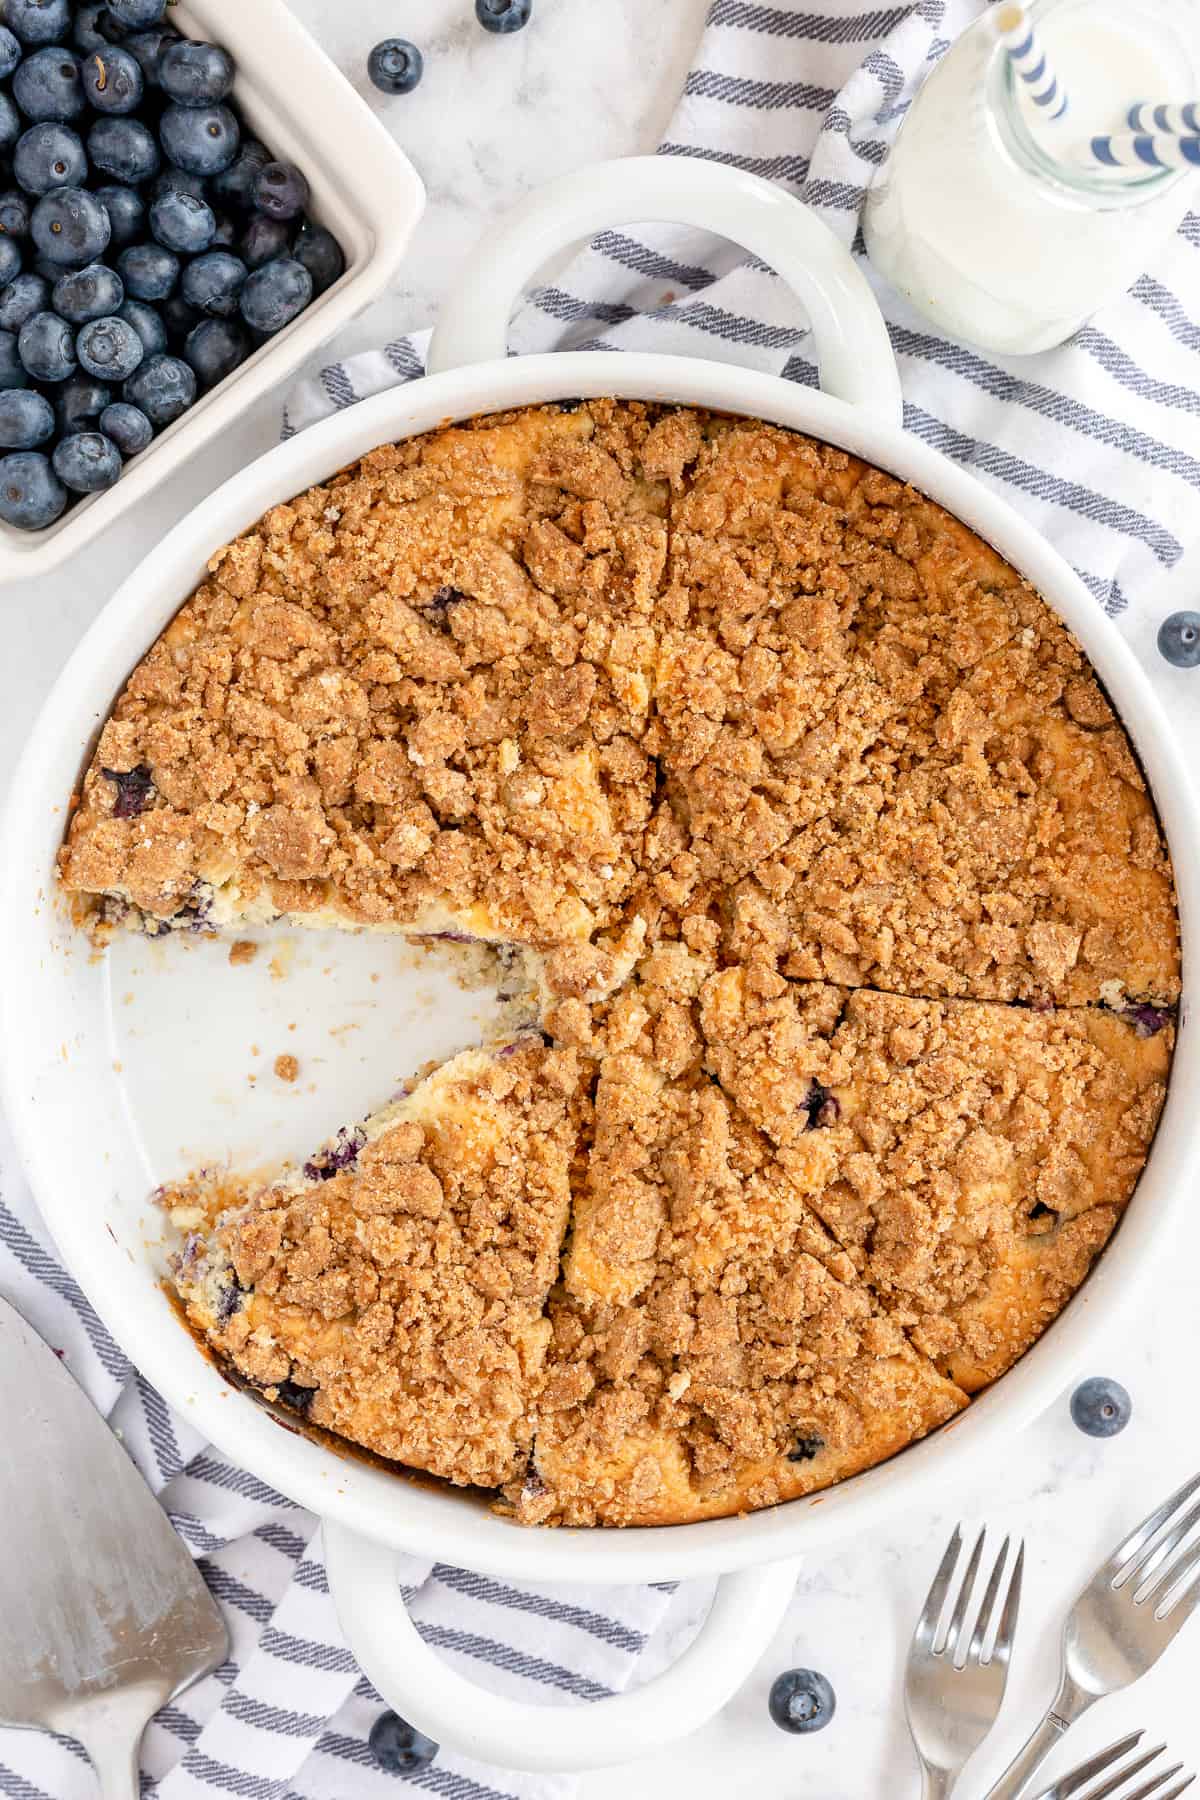 An over the top shot of a crumb cake in a round dish with a piece missing.